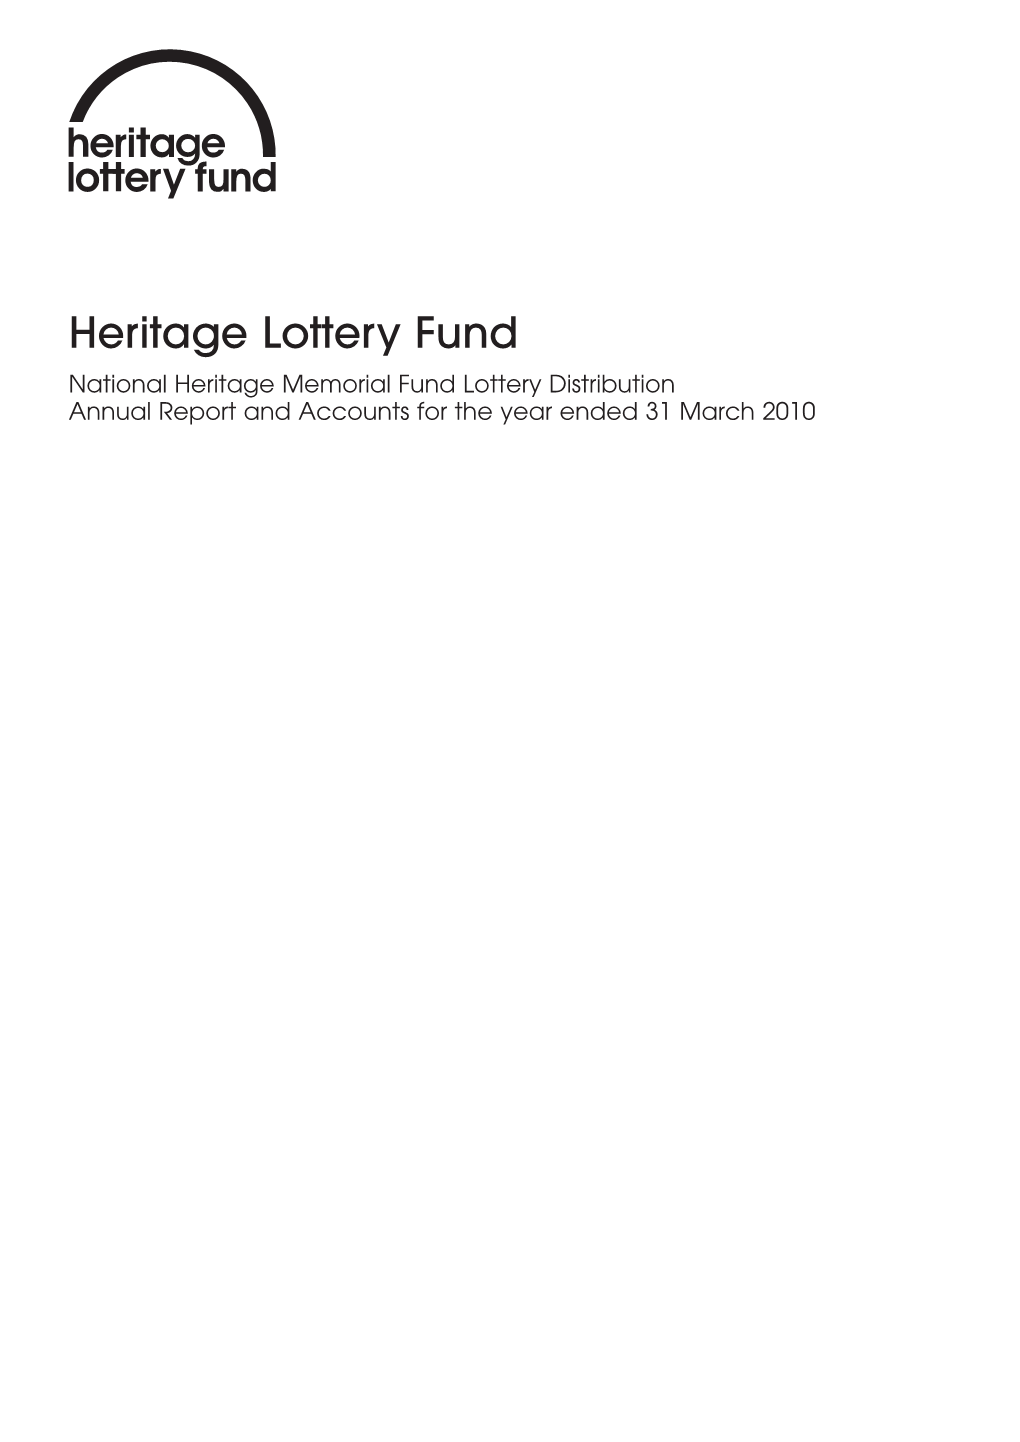 Heritage Lottery Fund National Heritage Memorial Fund Lottery